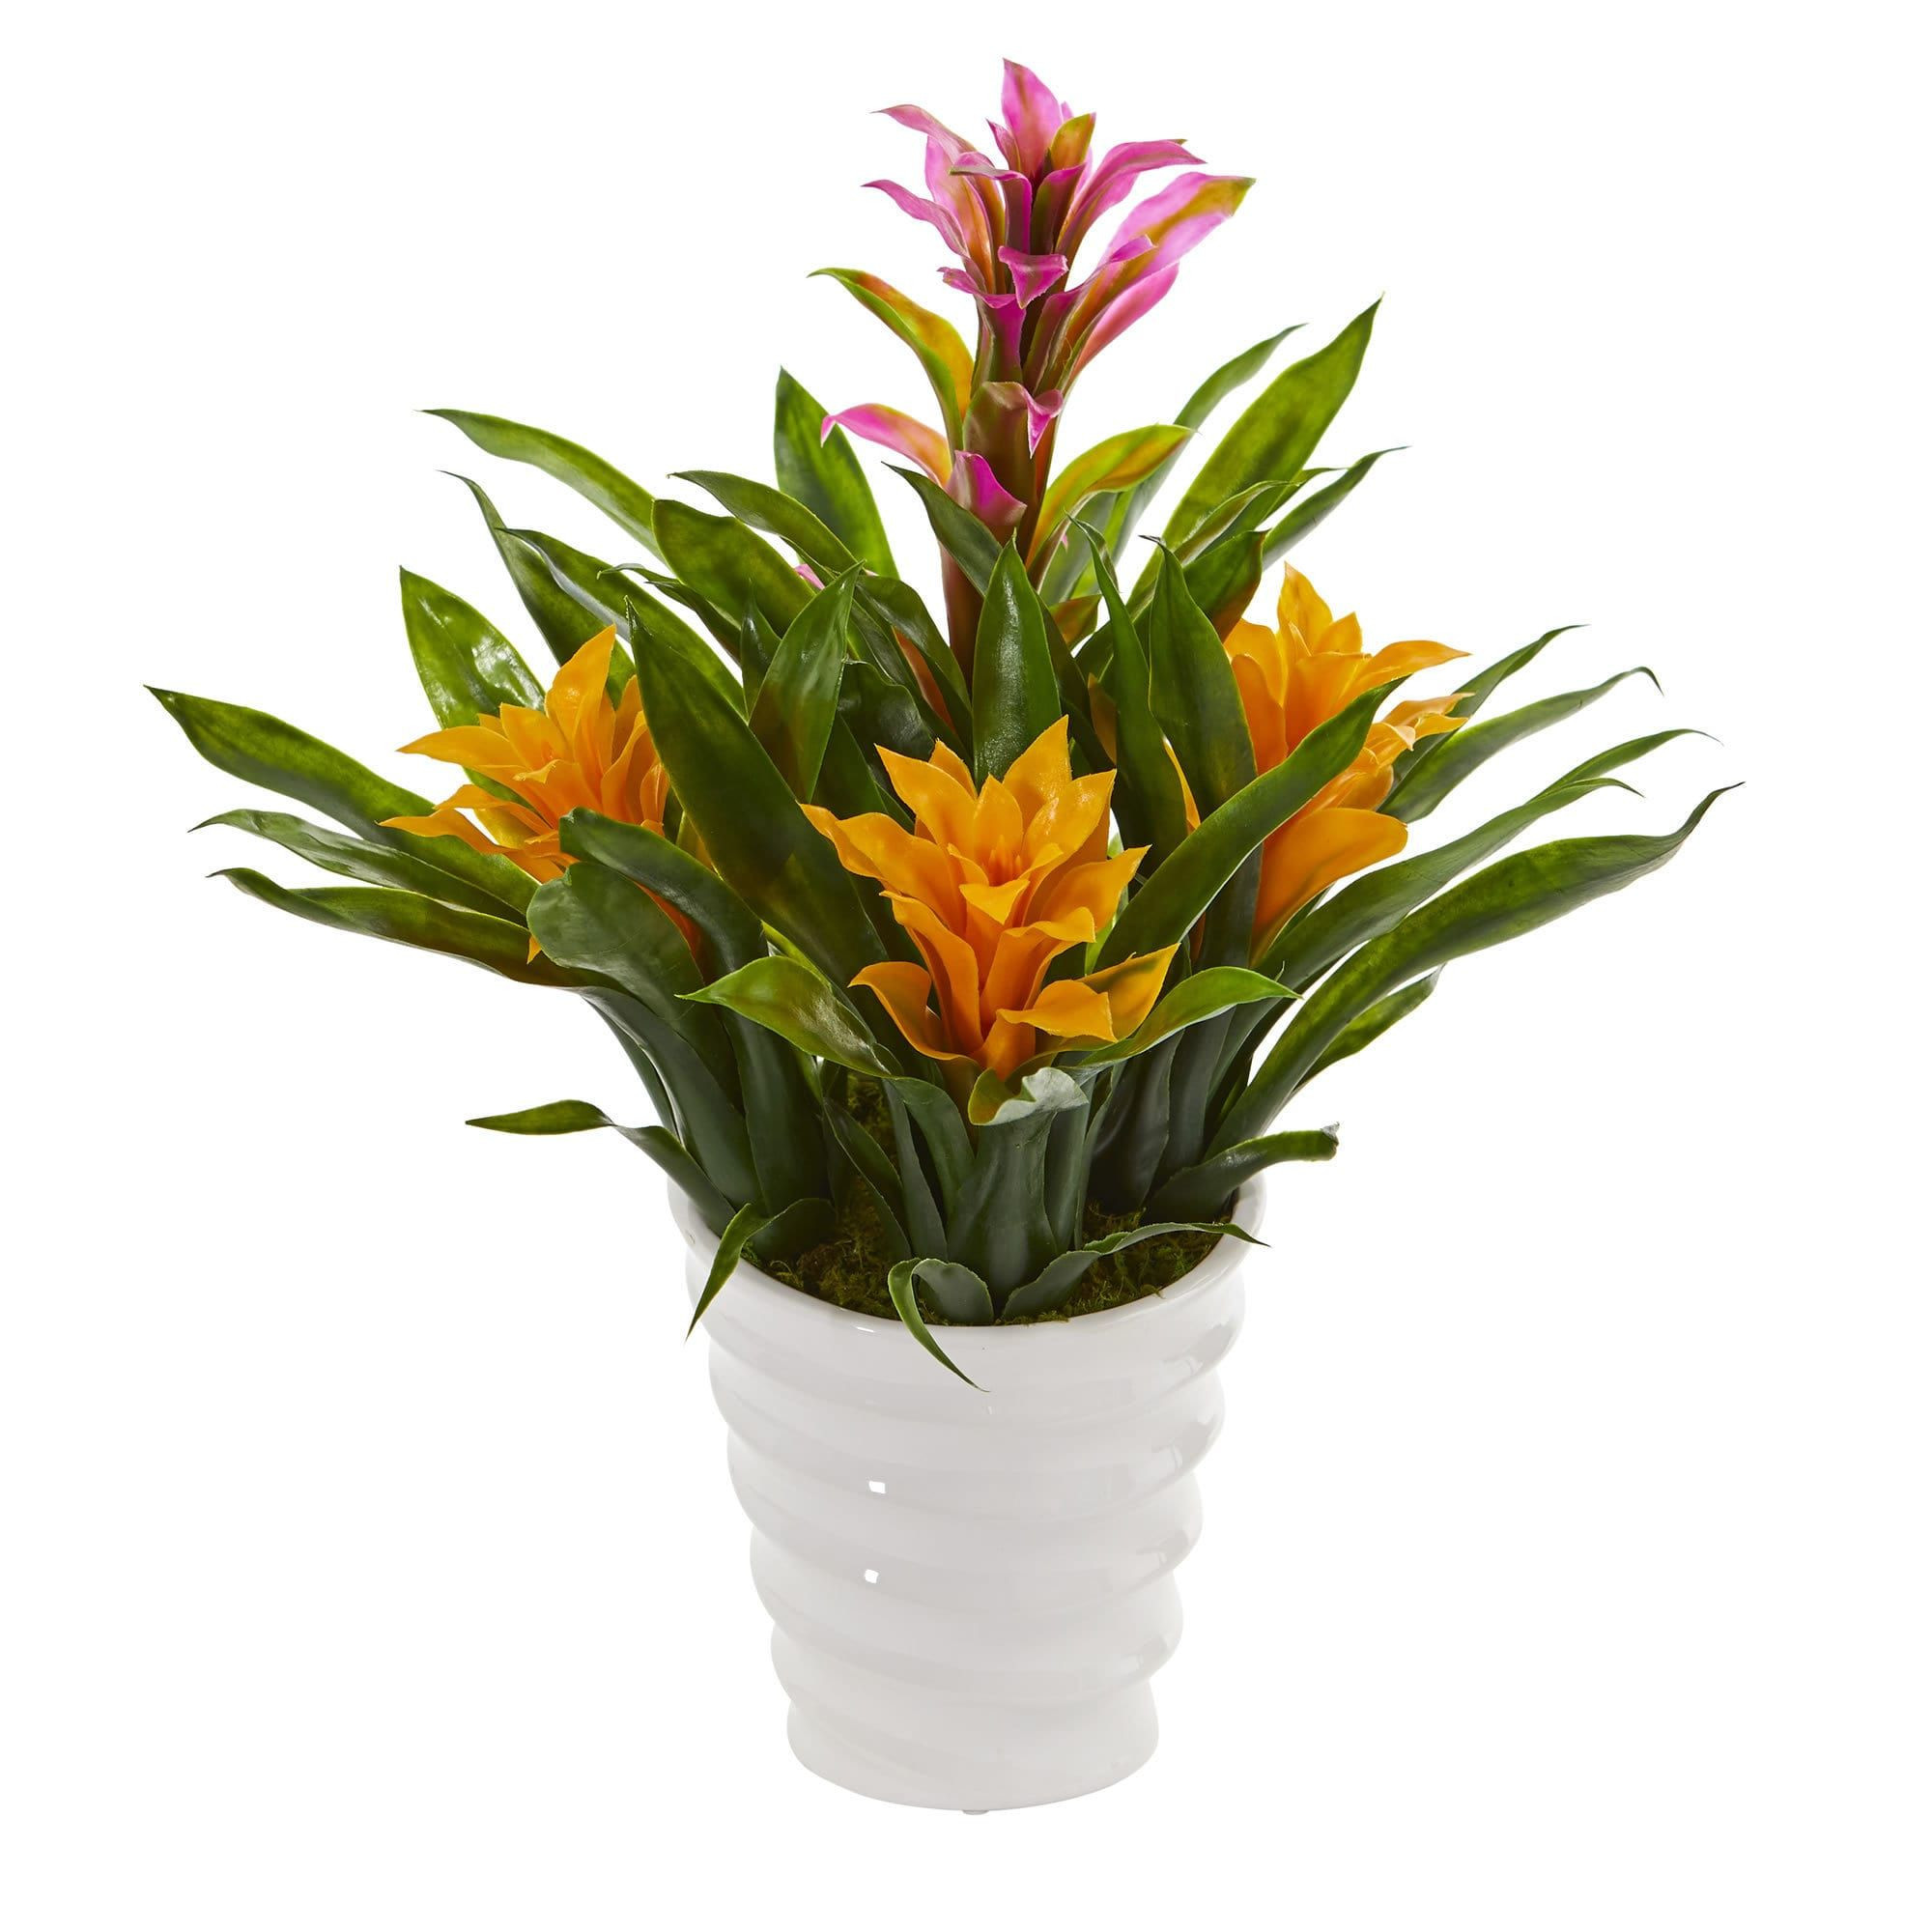 25 Nice Fake Flower Arrangements In Vases 2024 free download fake flower arrangements in vases of nearly natural bromeliad artificial plant in white vase purple regarding nearly natural bromeliad artificial plant in white vase purple yellow